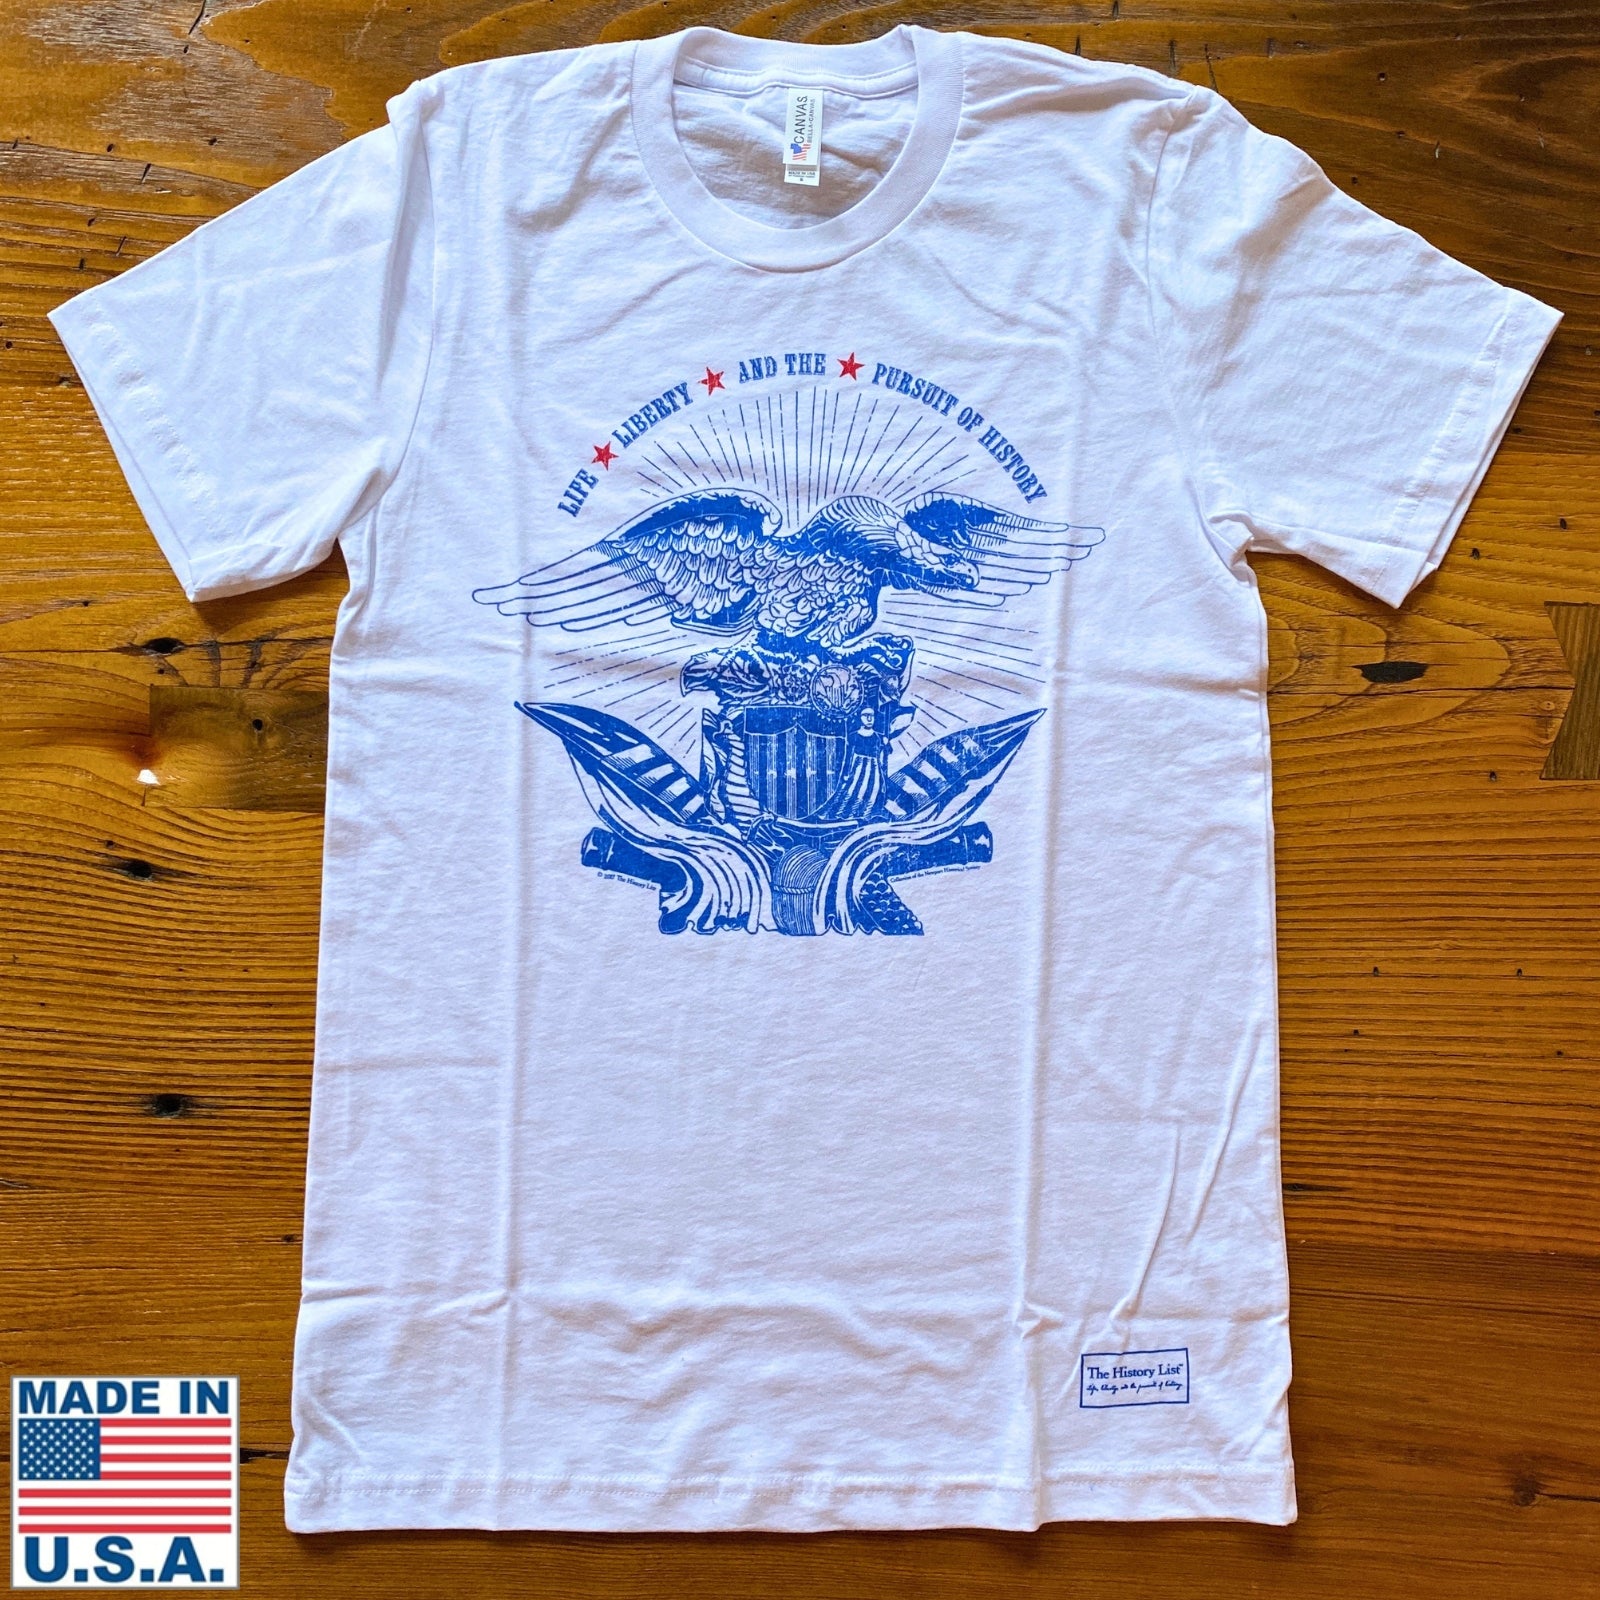 White "Life, liberty, and the pursuit of history" T-Shirt from The History List store